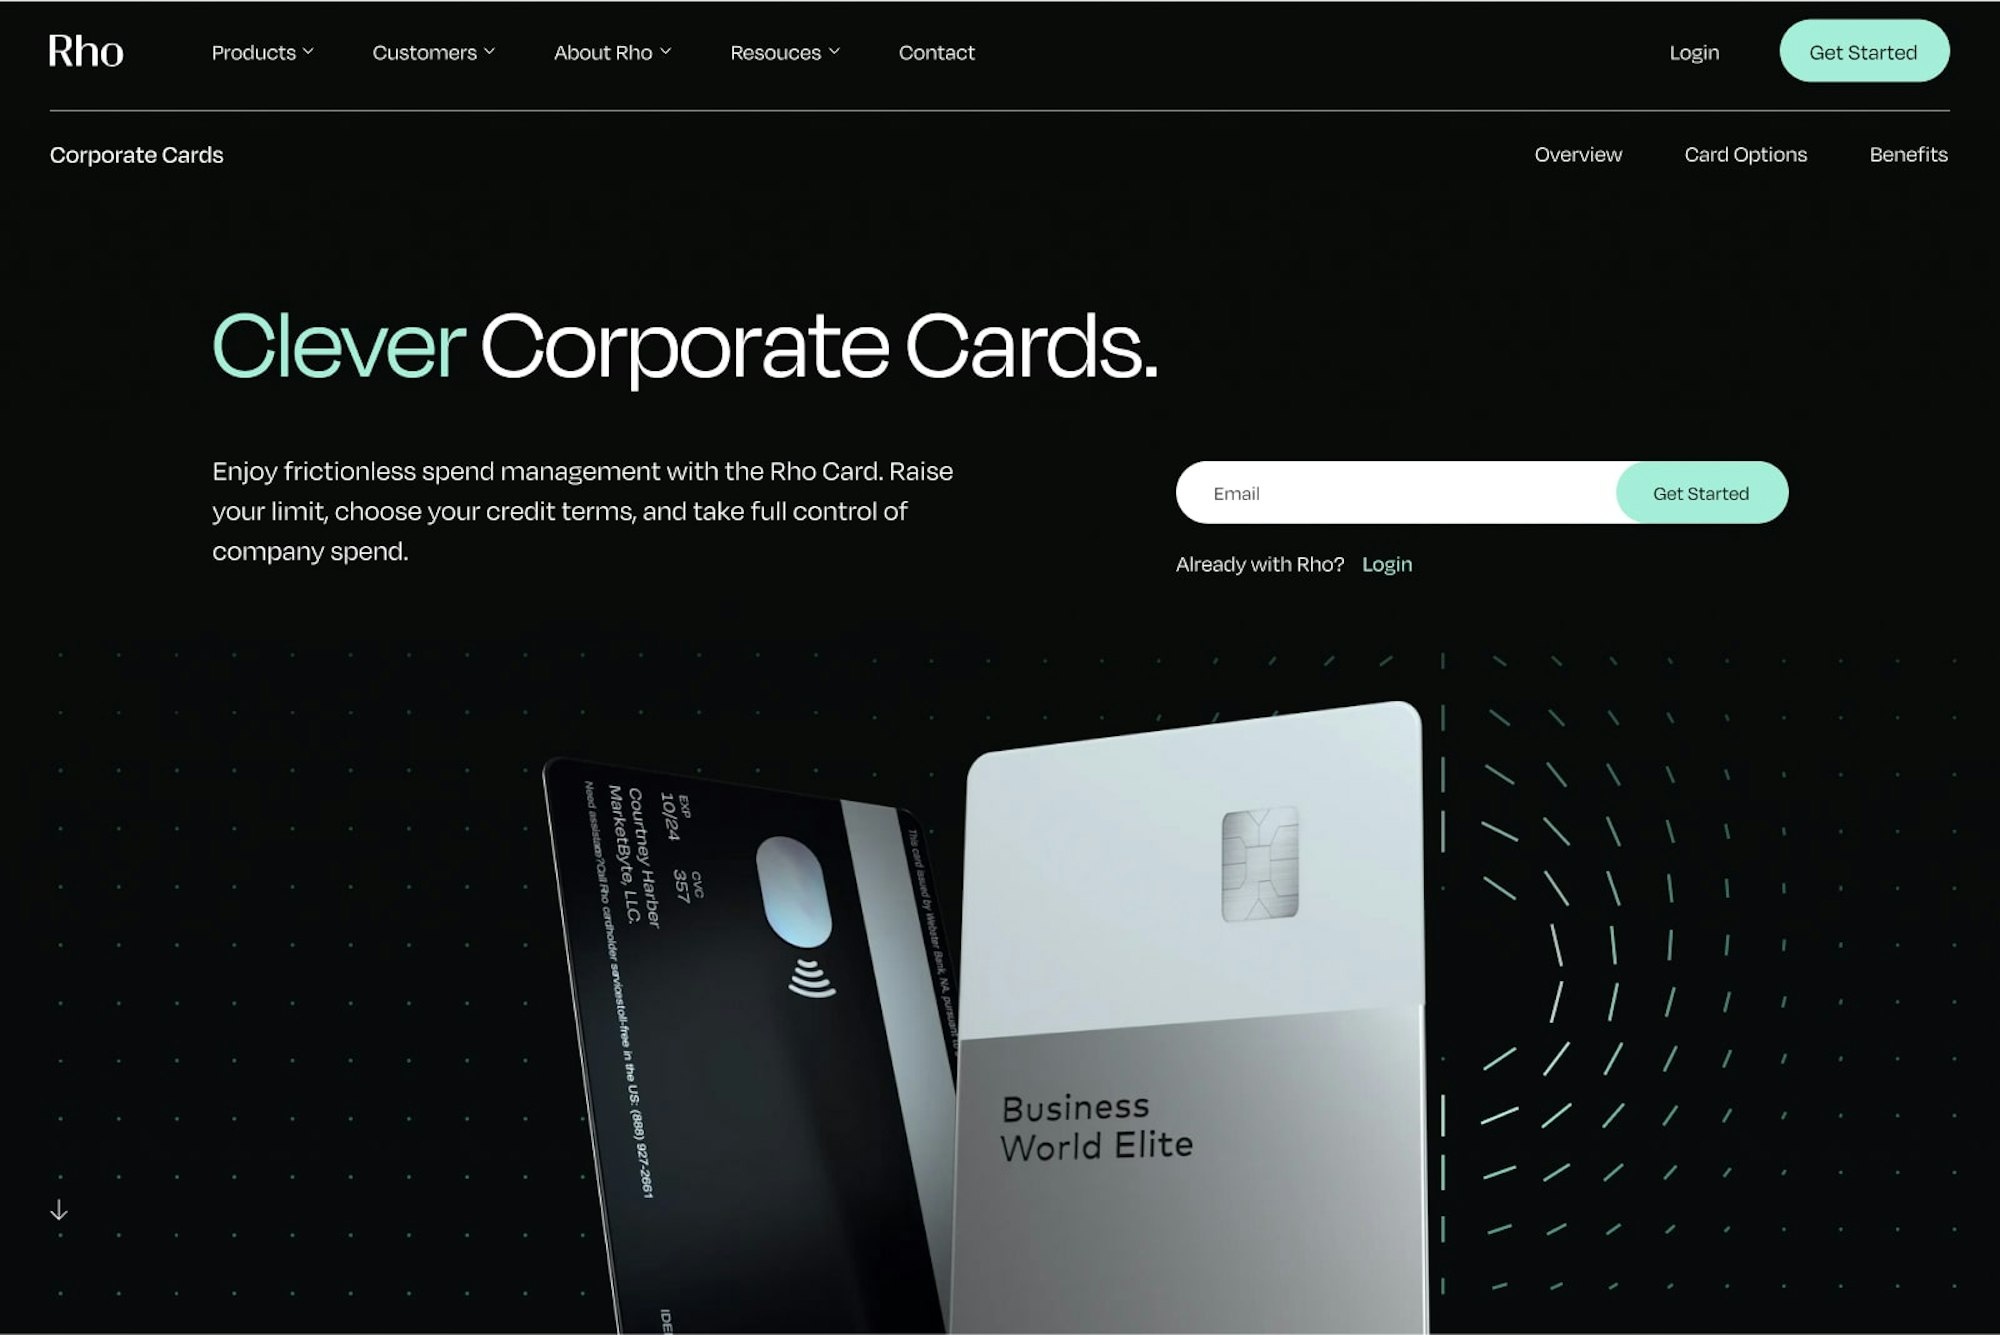 Screenshot of a Modern Credit Card Company Website Design - Featuring Easy Navigation and Secure Transactions